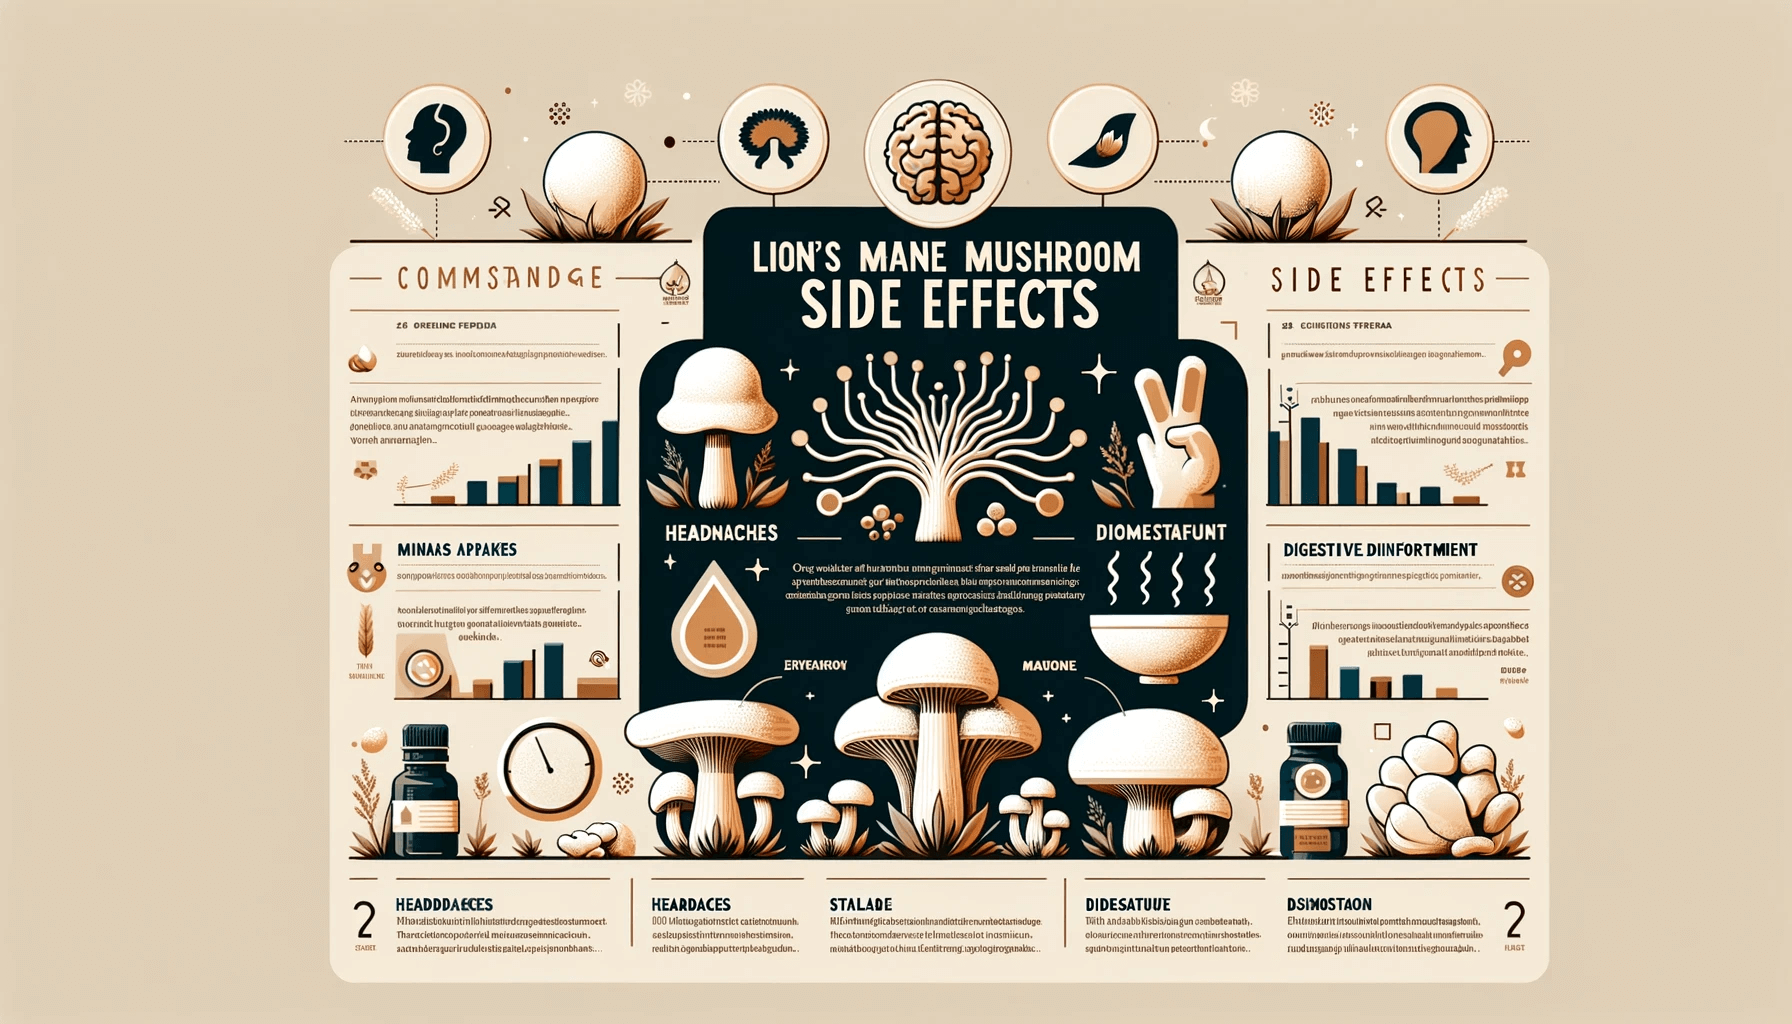 Infographic detailing common side effects of Lion's Mane mushroom, including headaches and digestive discomfort